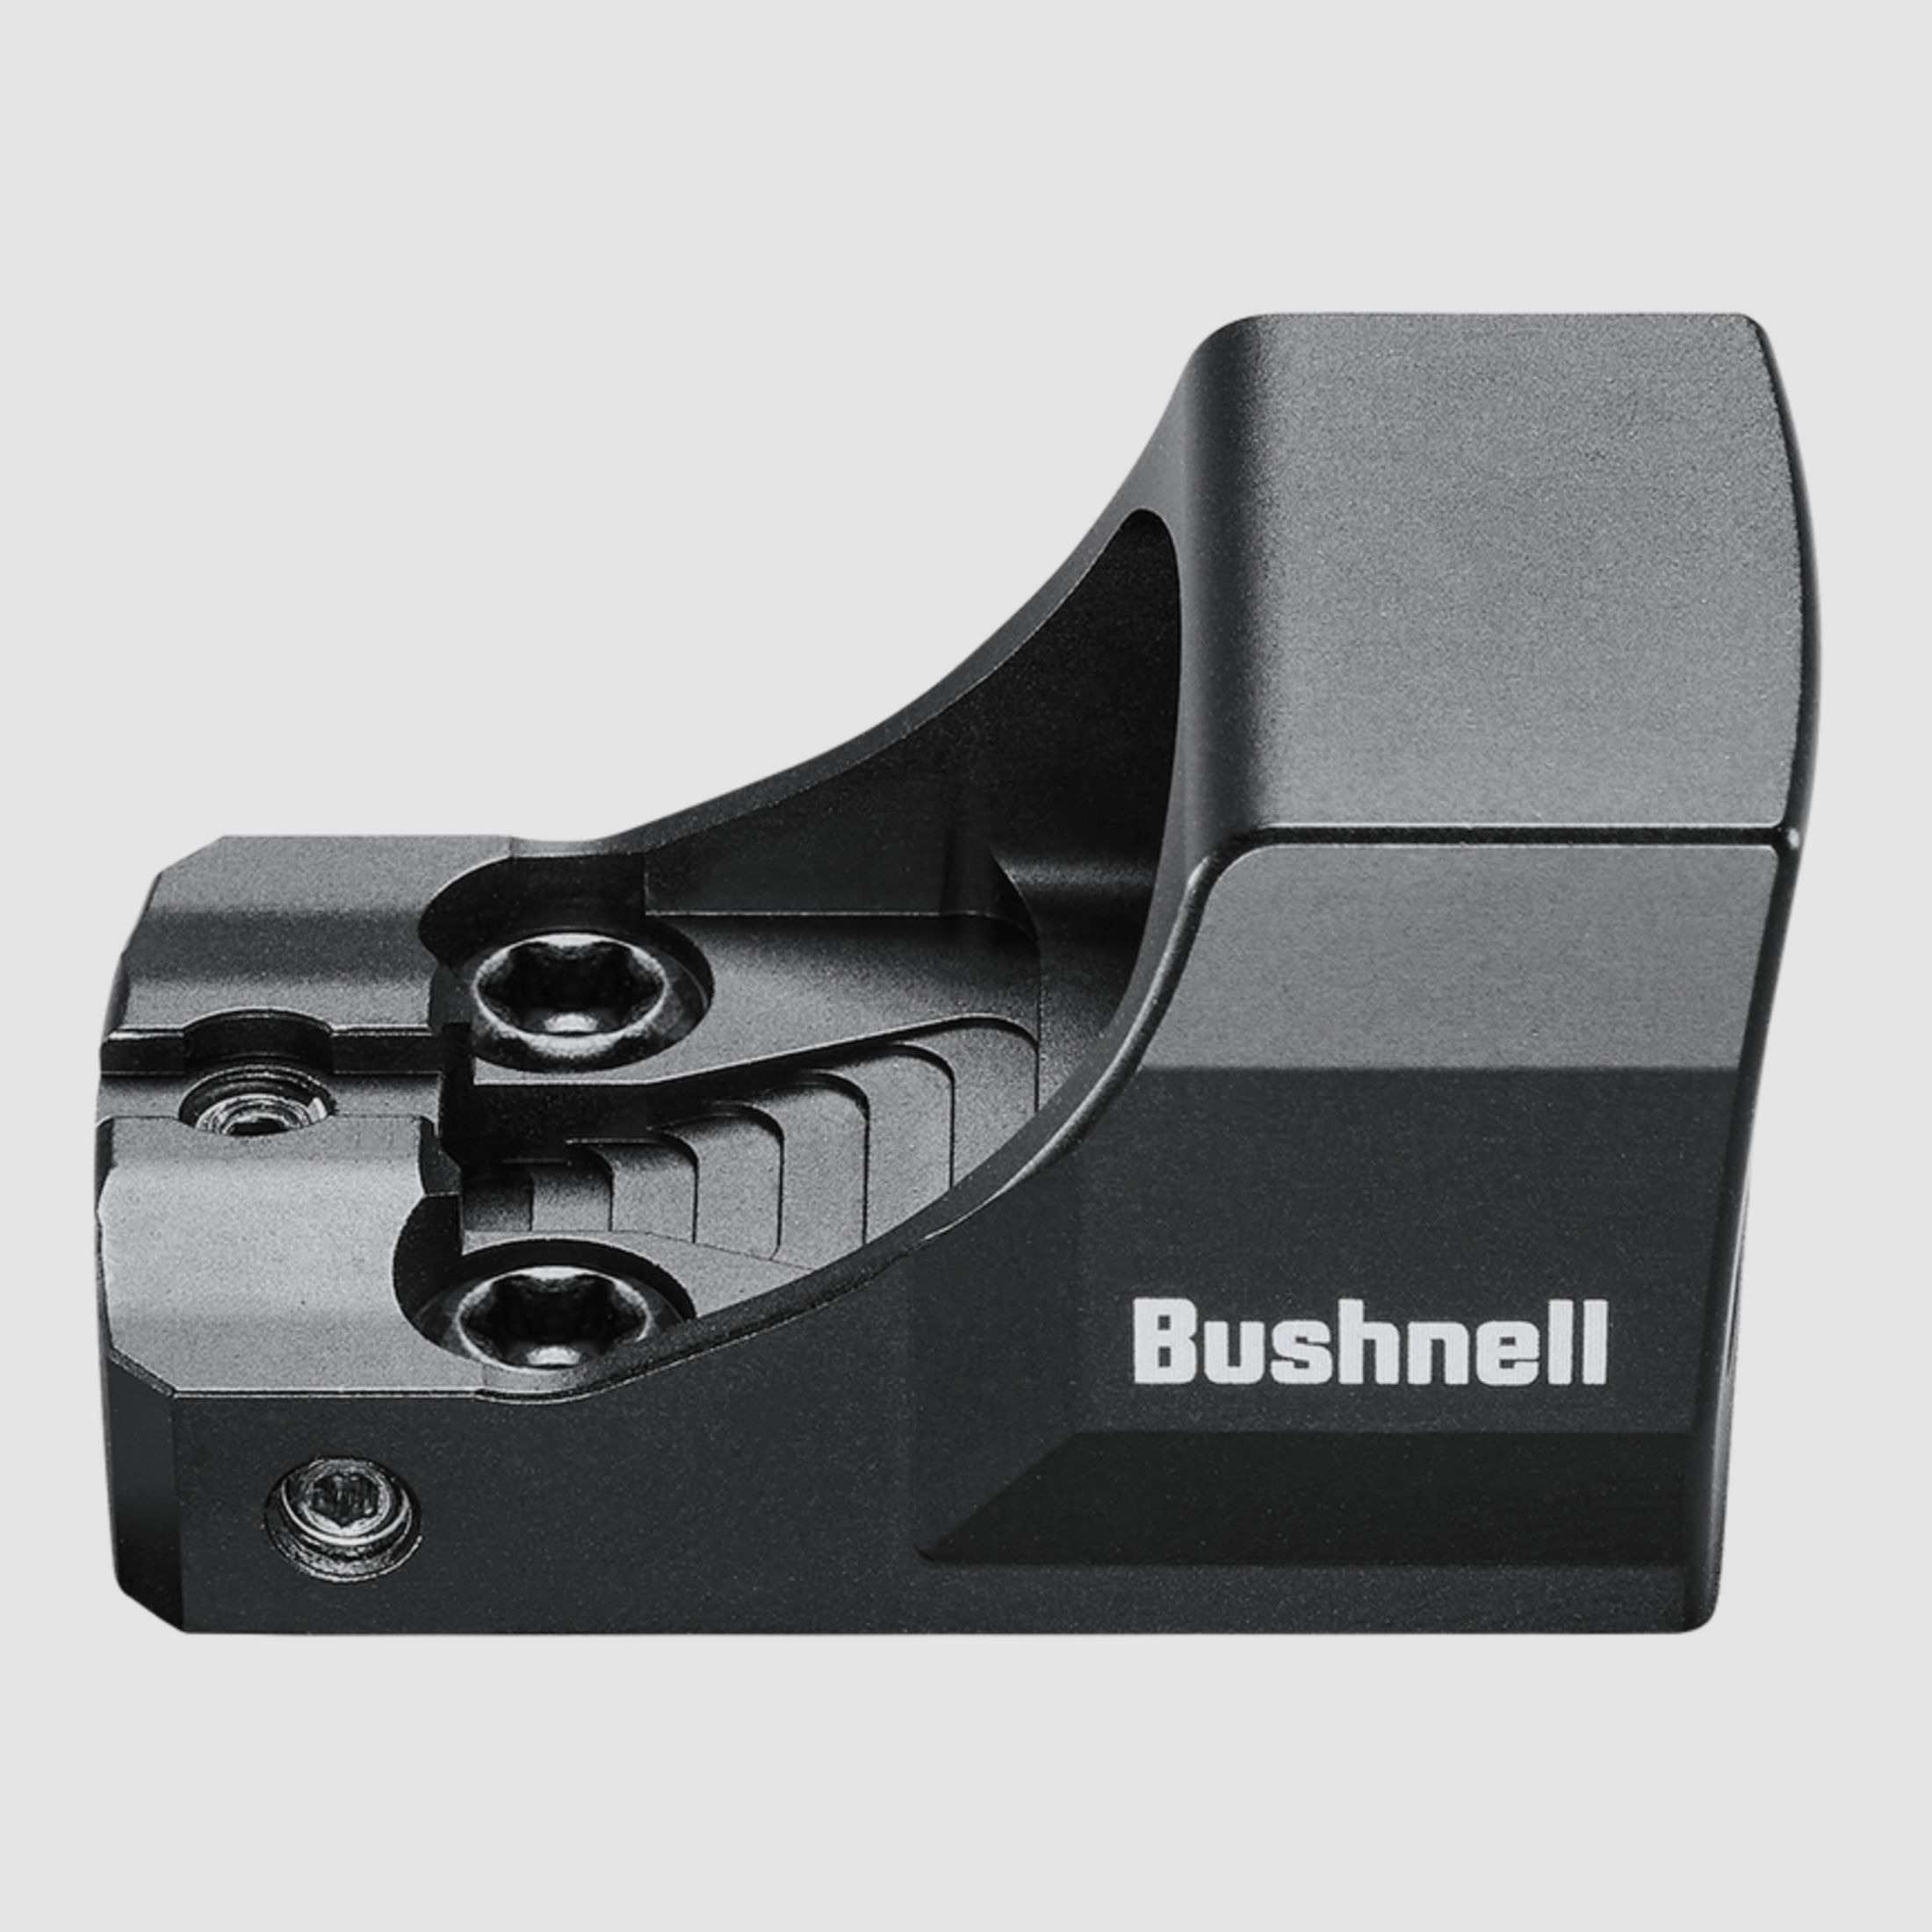 Bushnell RXC-200 1x21mm 6 MOA Dot Reticle 15mm TALL